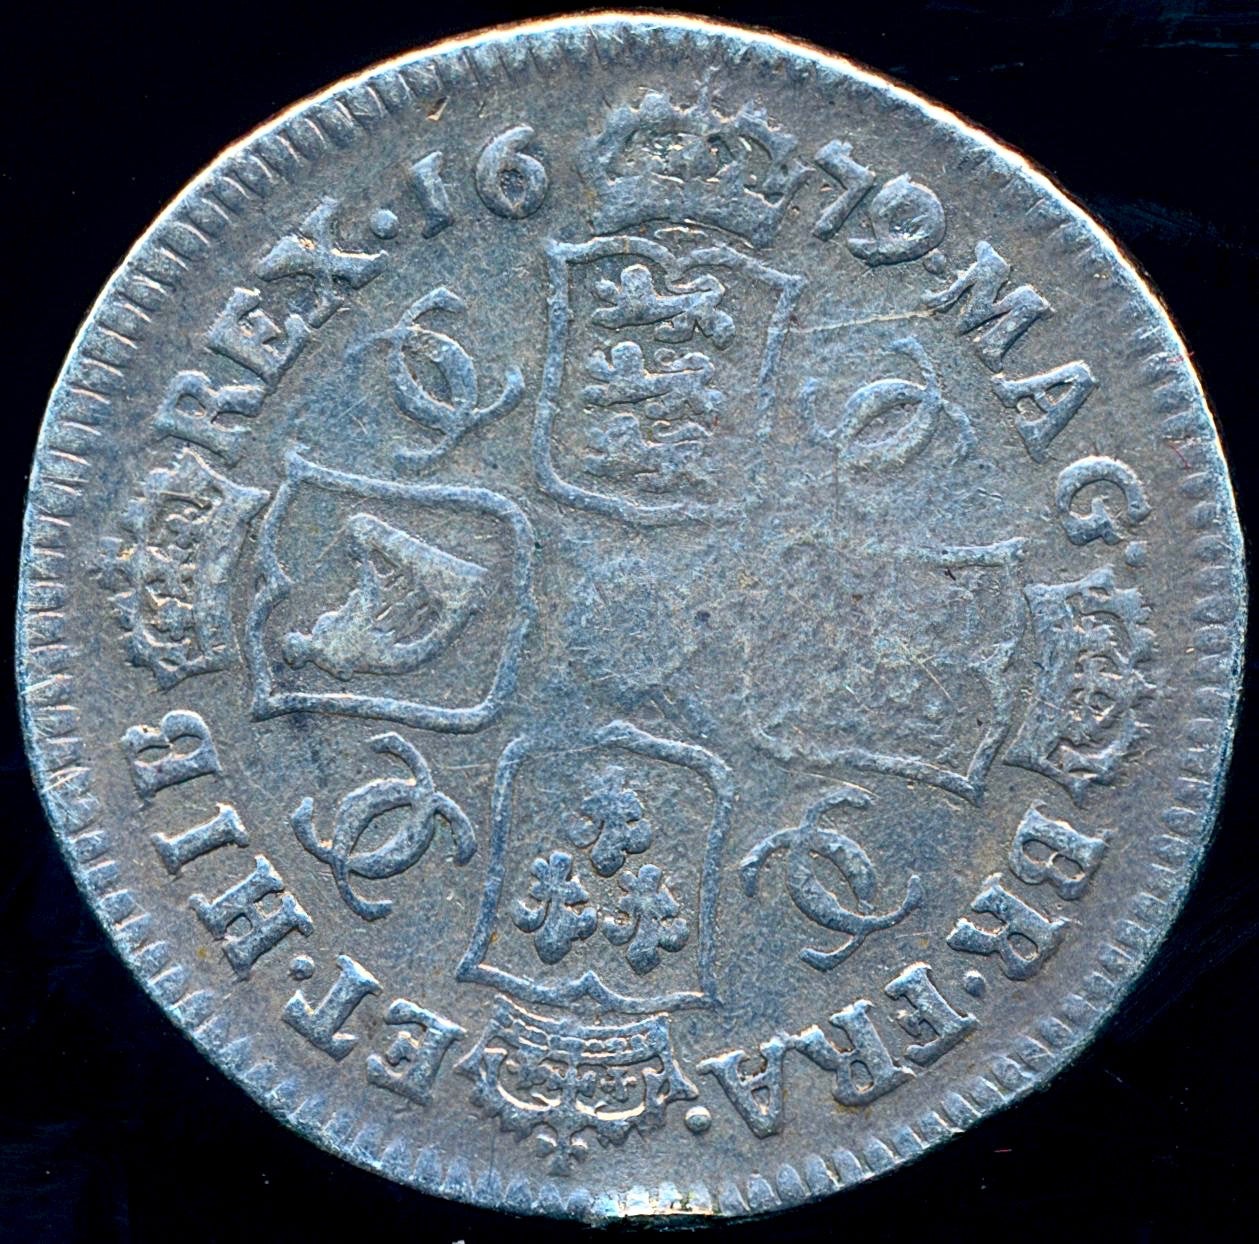 1679/7 Second bust variety Shilling S3375 ESC 546 Very rare (R2) AF